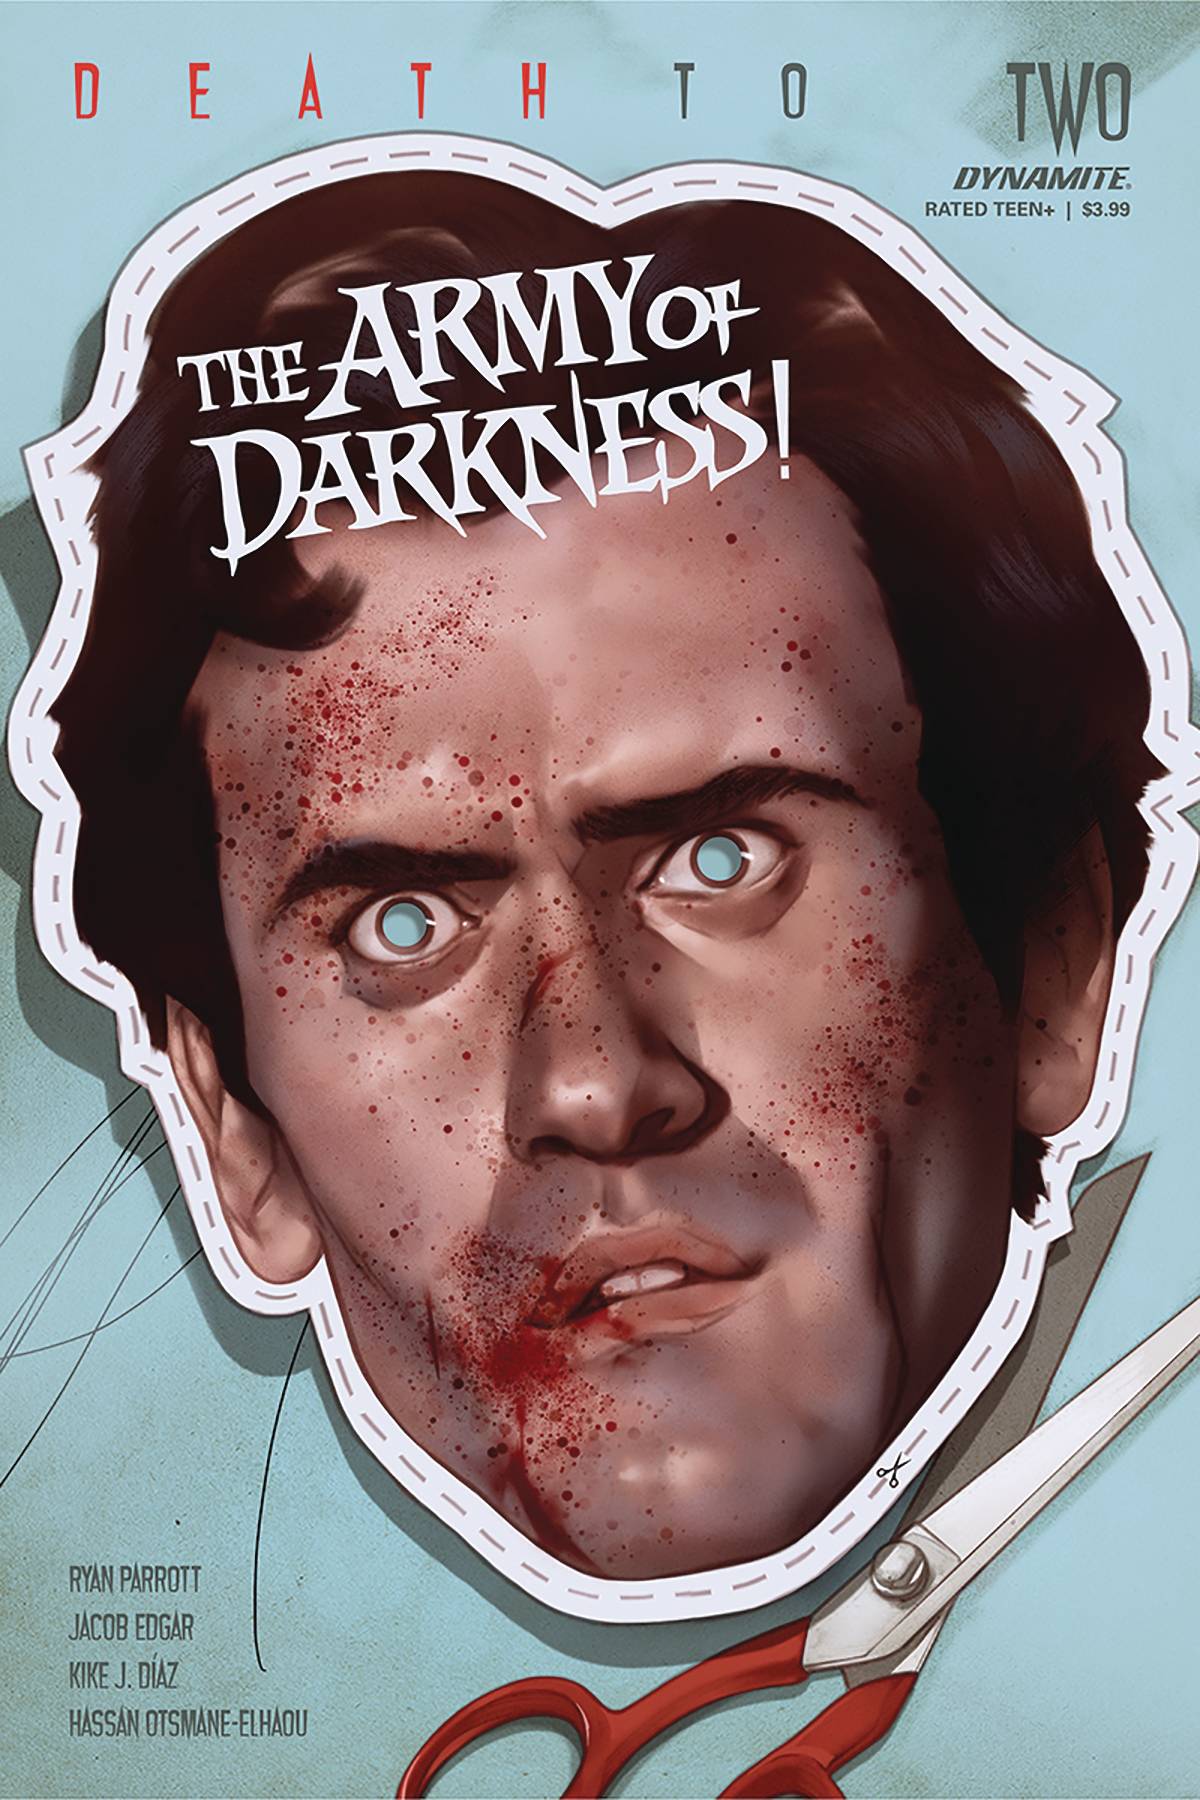 DEATH TO ARMY OF DARKNESS #2 CVR A OLIVER